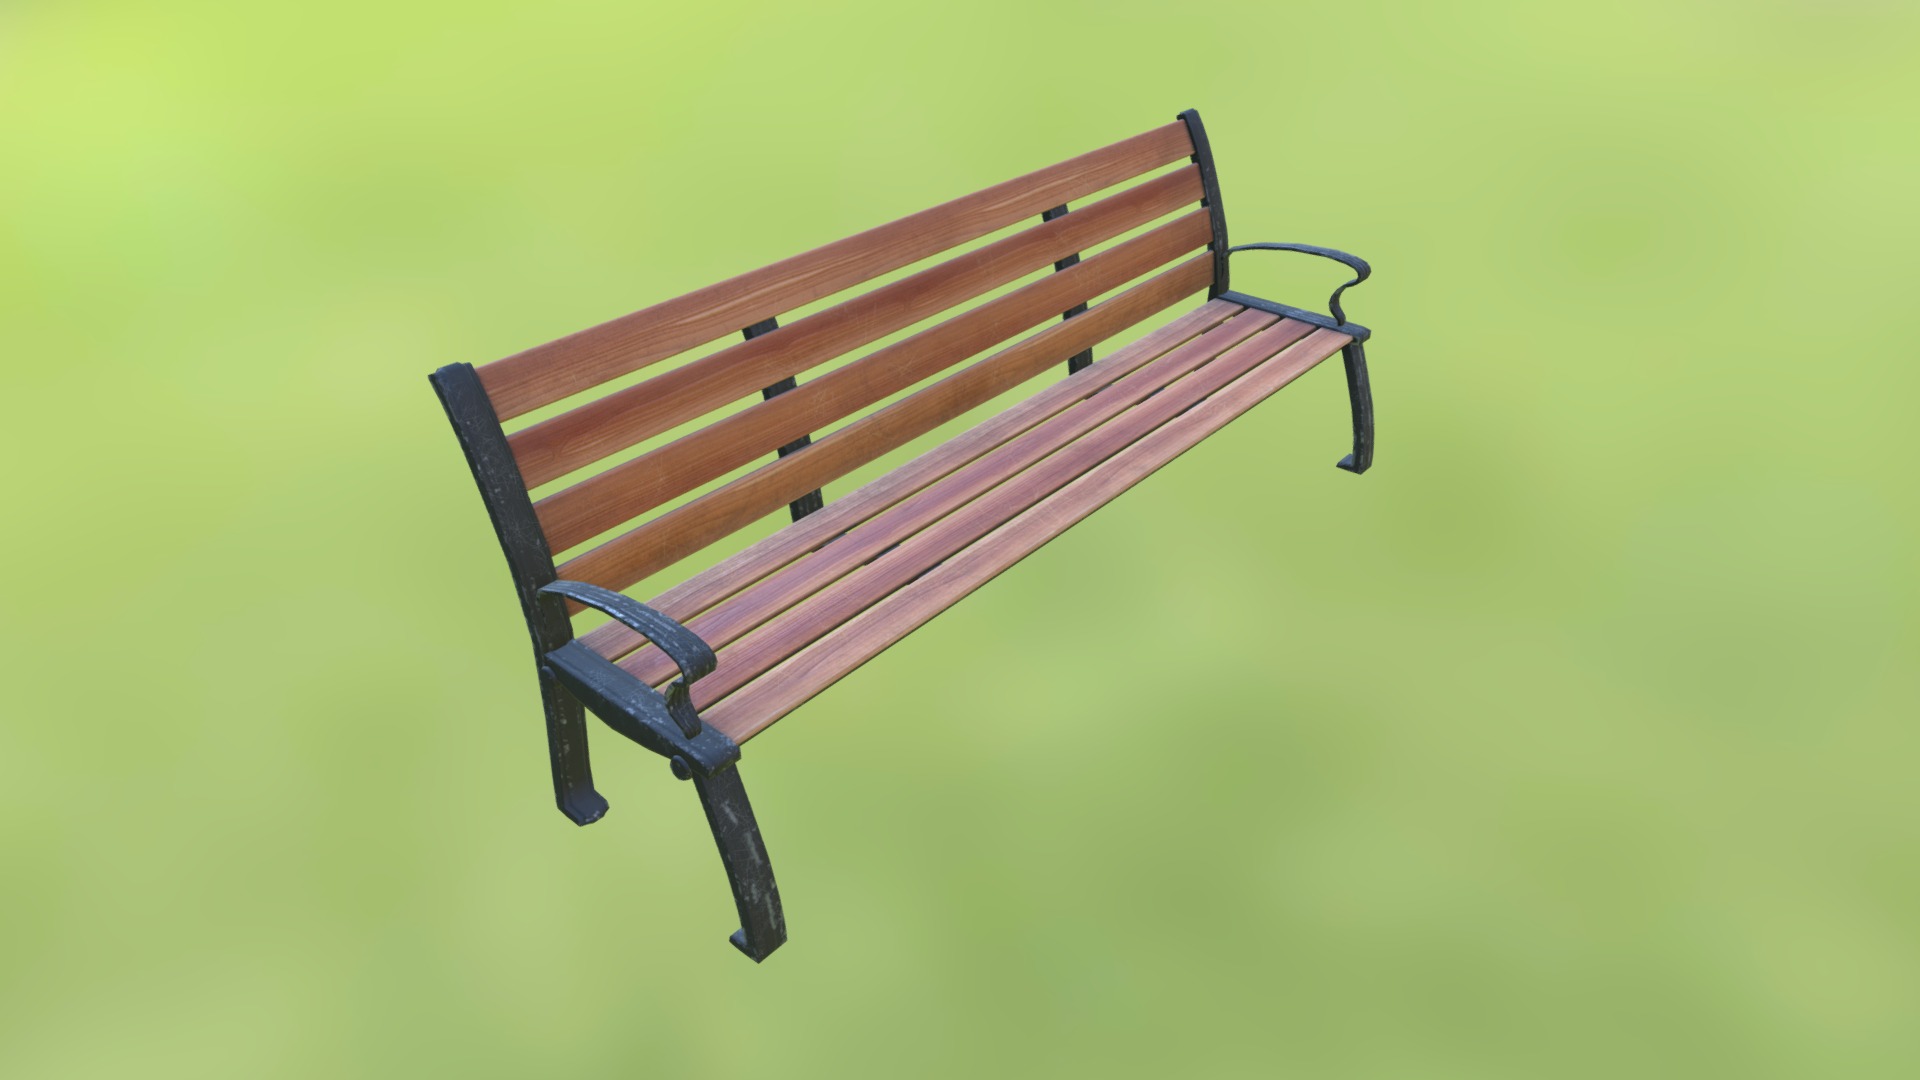 3D model Bench - This is a 3D model of the Bench. The 3D model is about a bench against a green background.